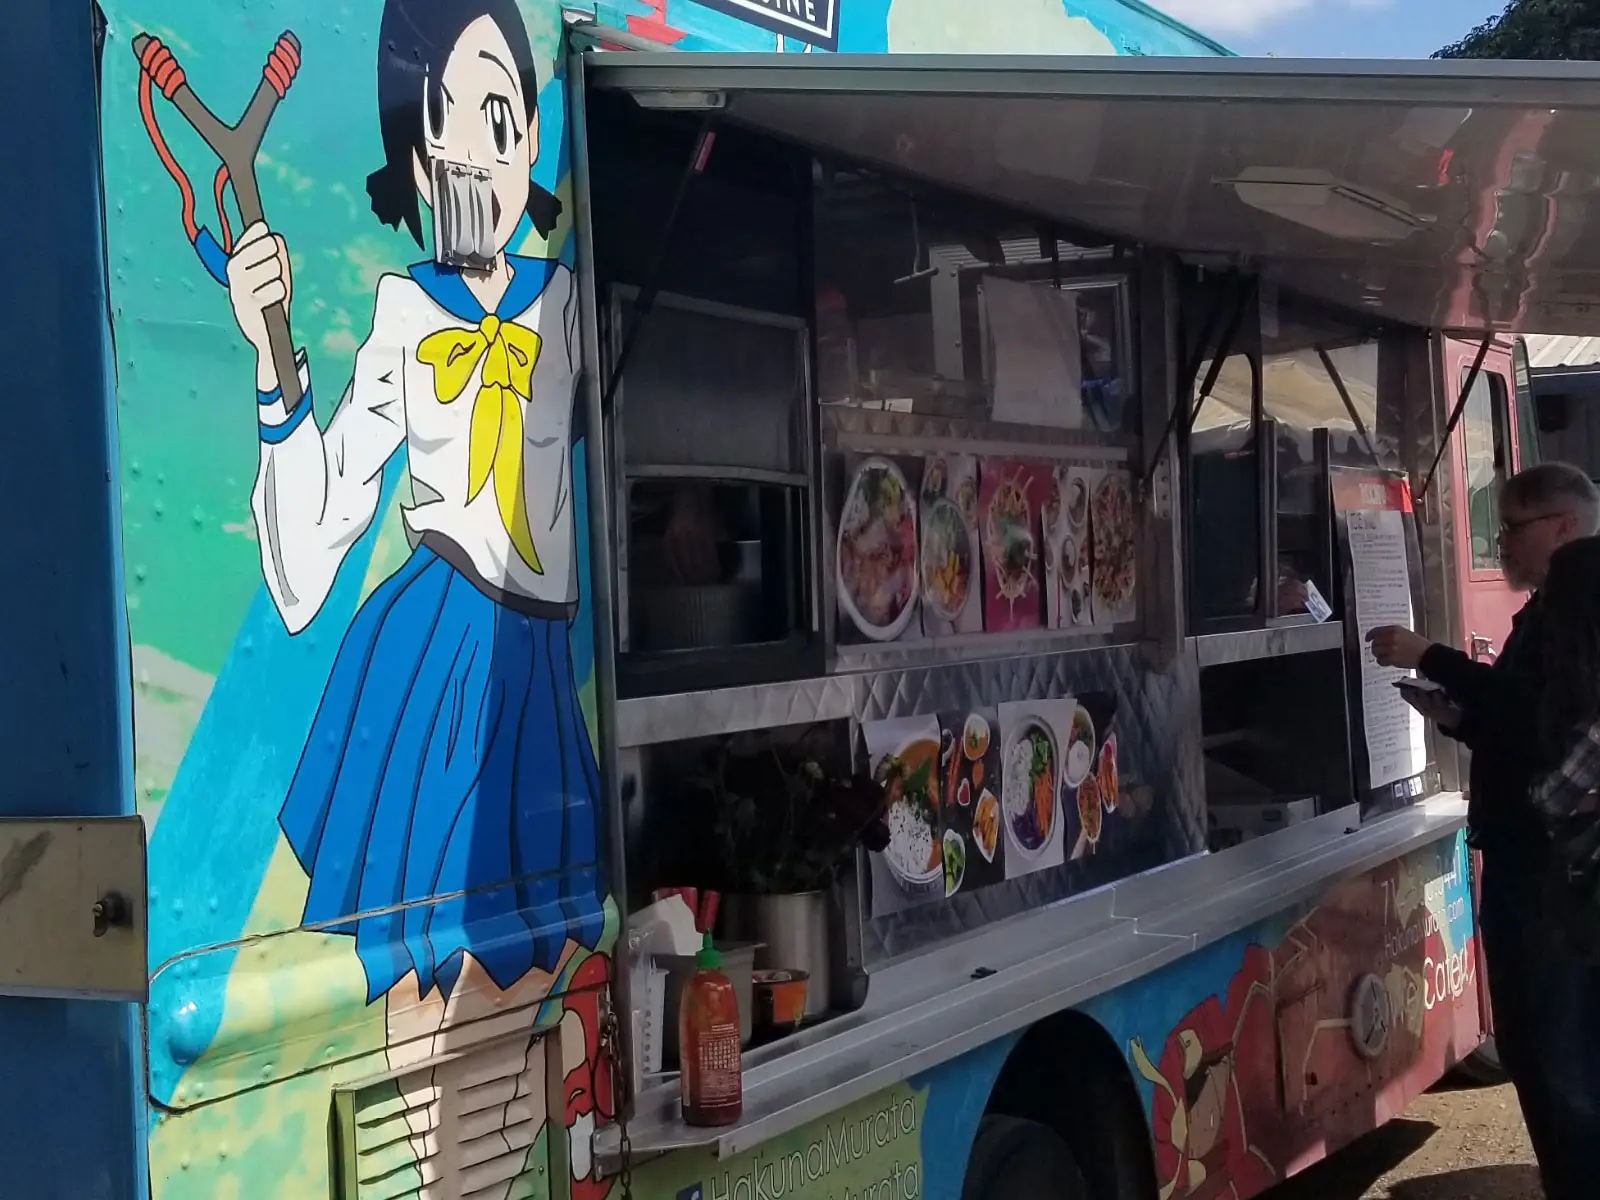 "Hakuna Murata", a Japanese and Filipino Cuisine food truck, featuring an anime character painted on its side, parked at the Wilsonville campus